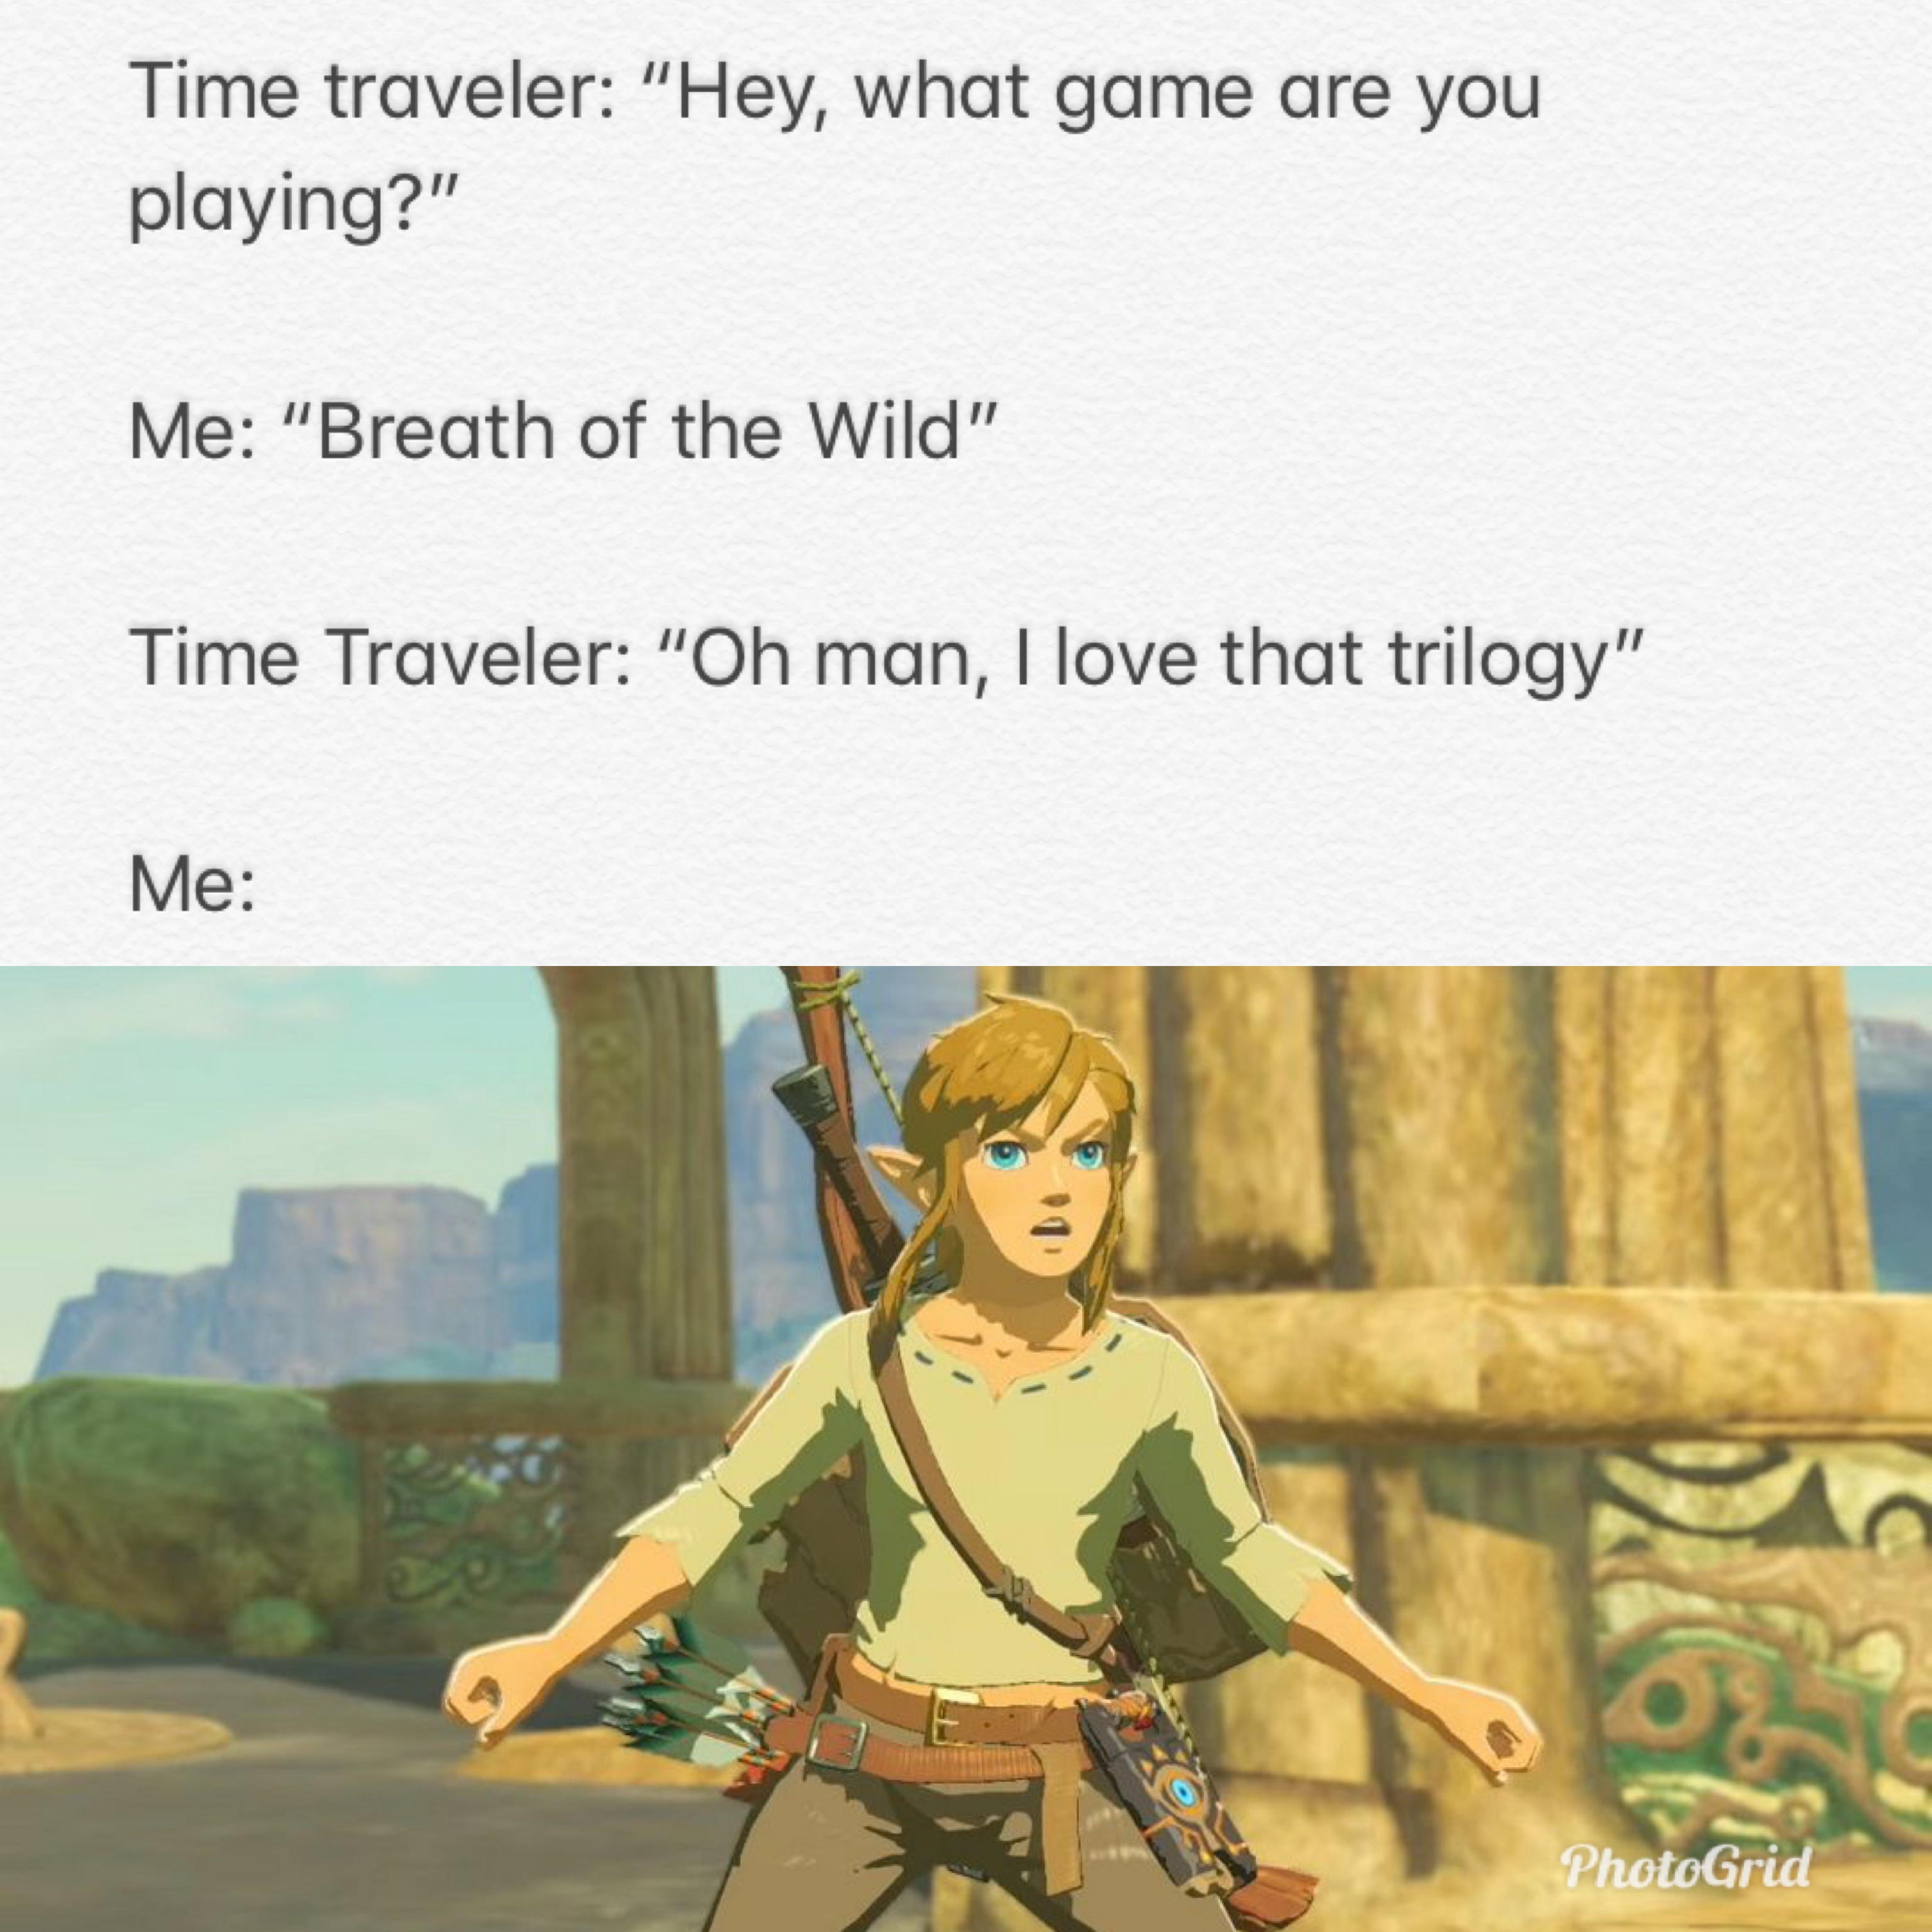 zelda meme - breath of the wild link skyrim - Time traveler "Hey, what game are you playing?" Me "Breath of the Wild" Time Traveler "Oh man, I love that trilogy" Me PhotoGrid